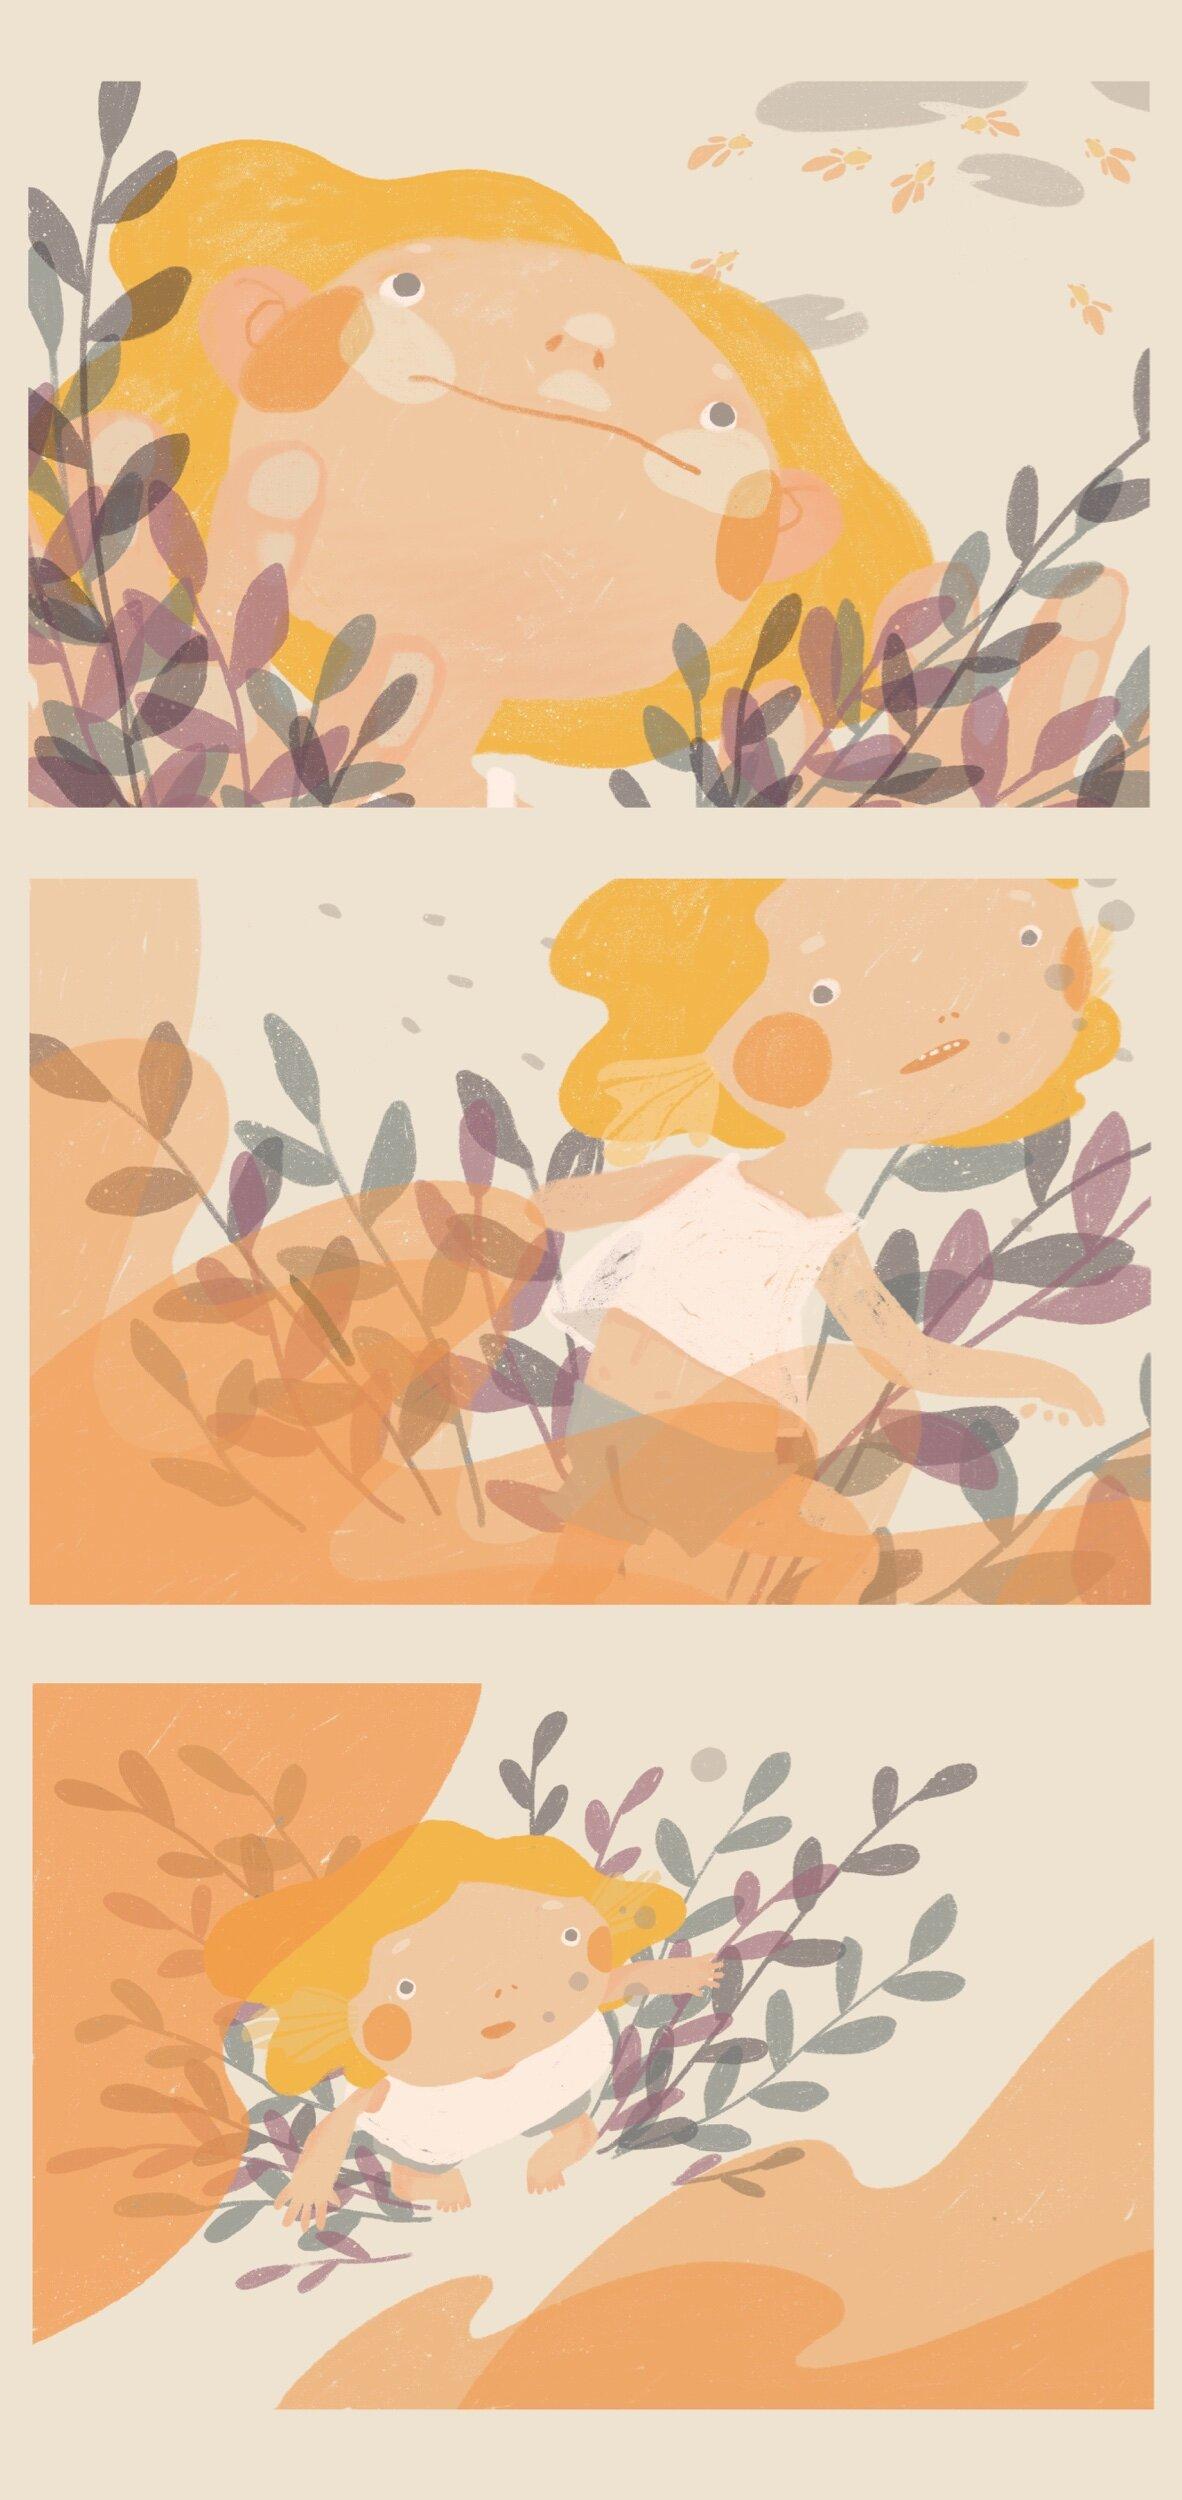 sequence of a girl looking at goldfish